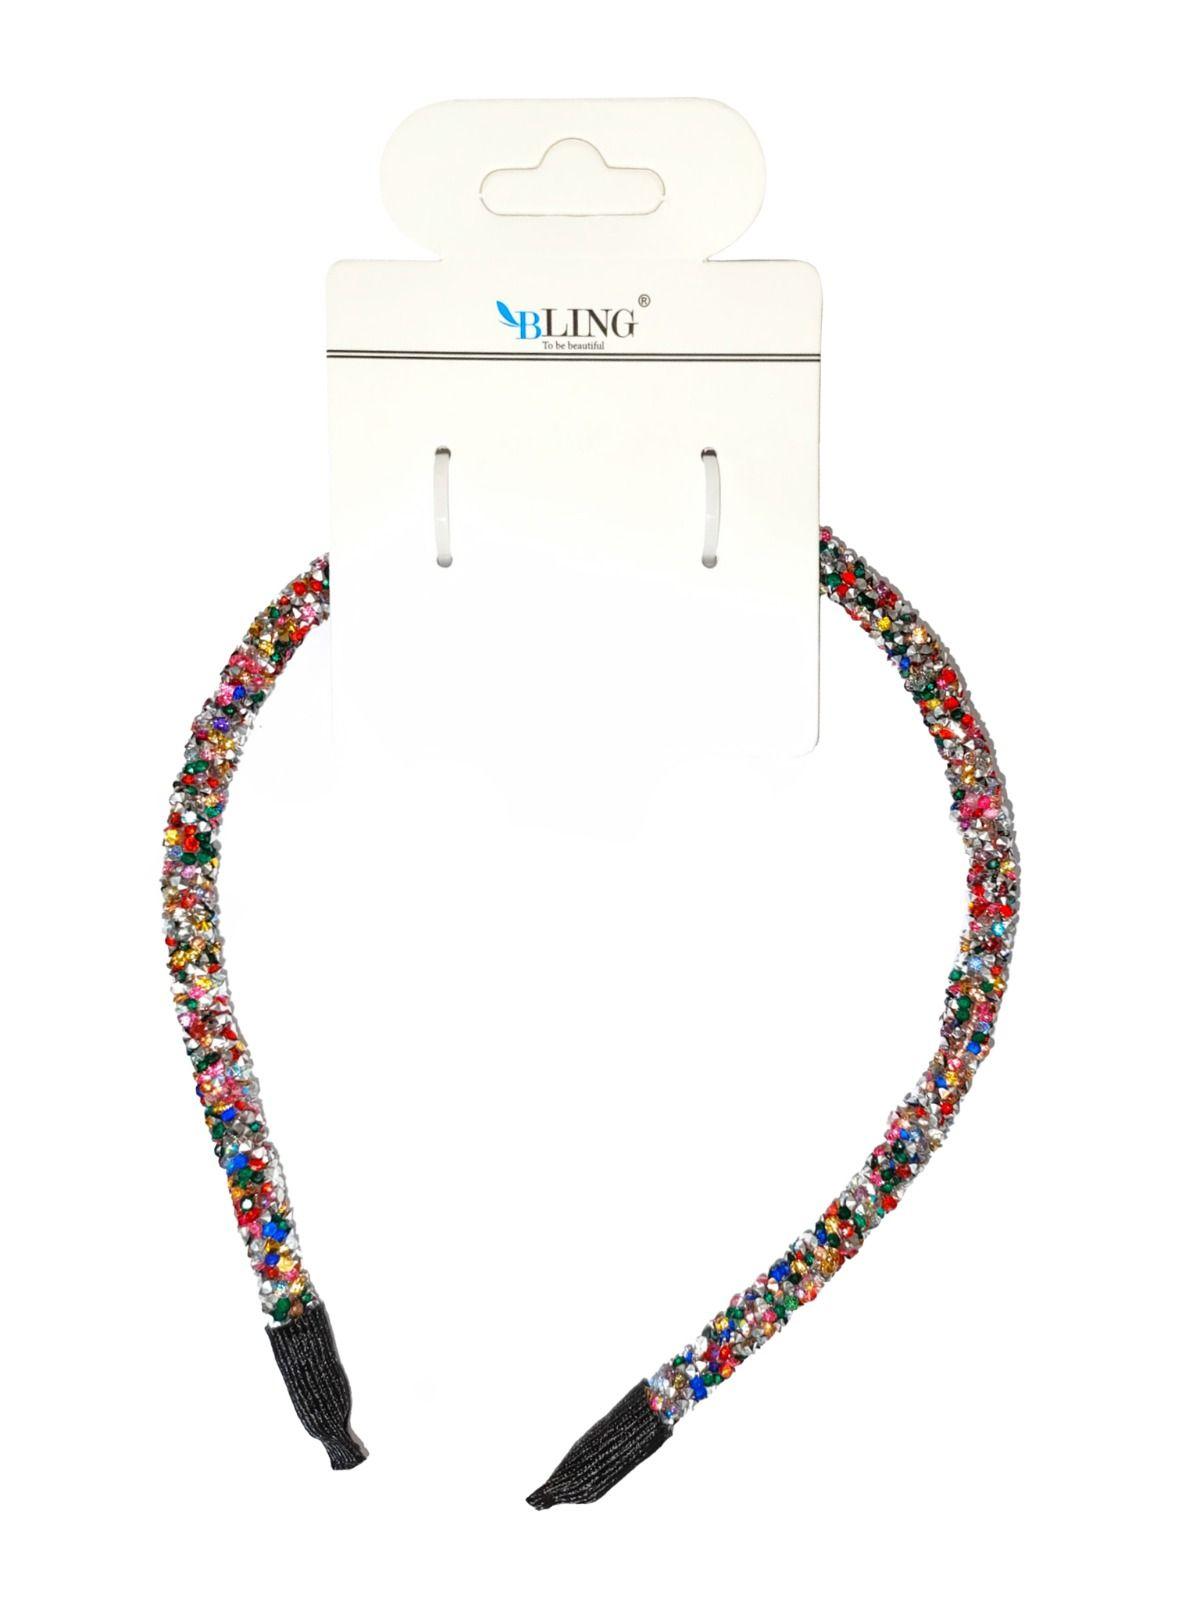 BLING hairband with dewlap crystals - colorful